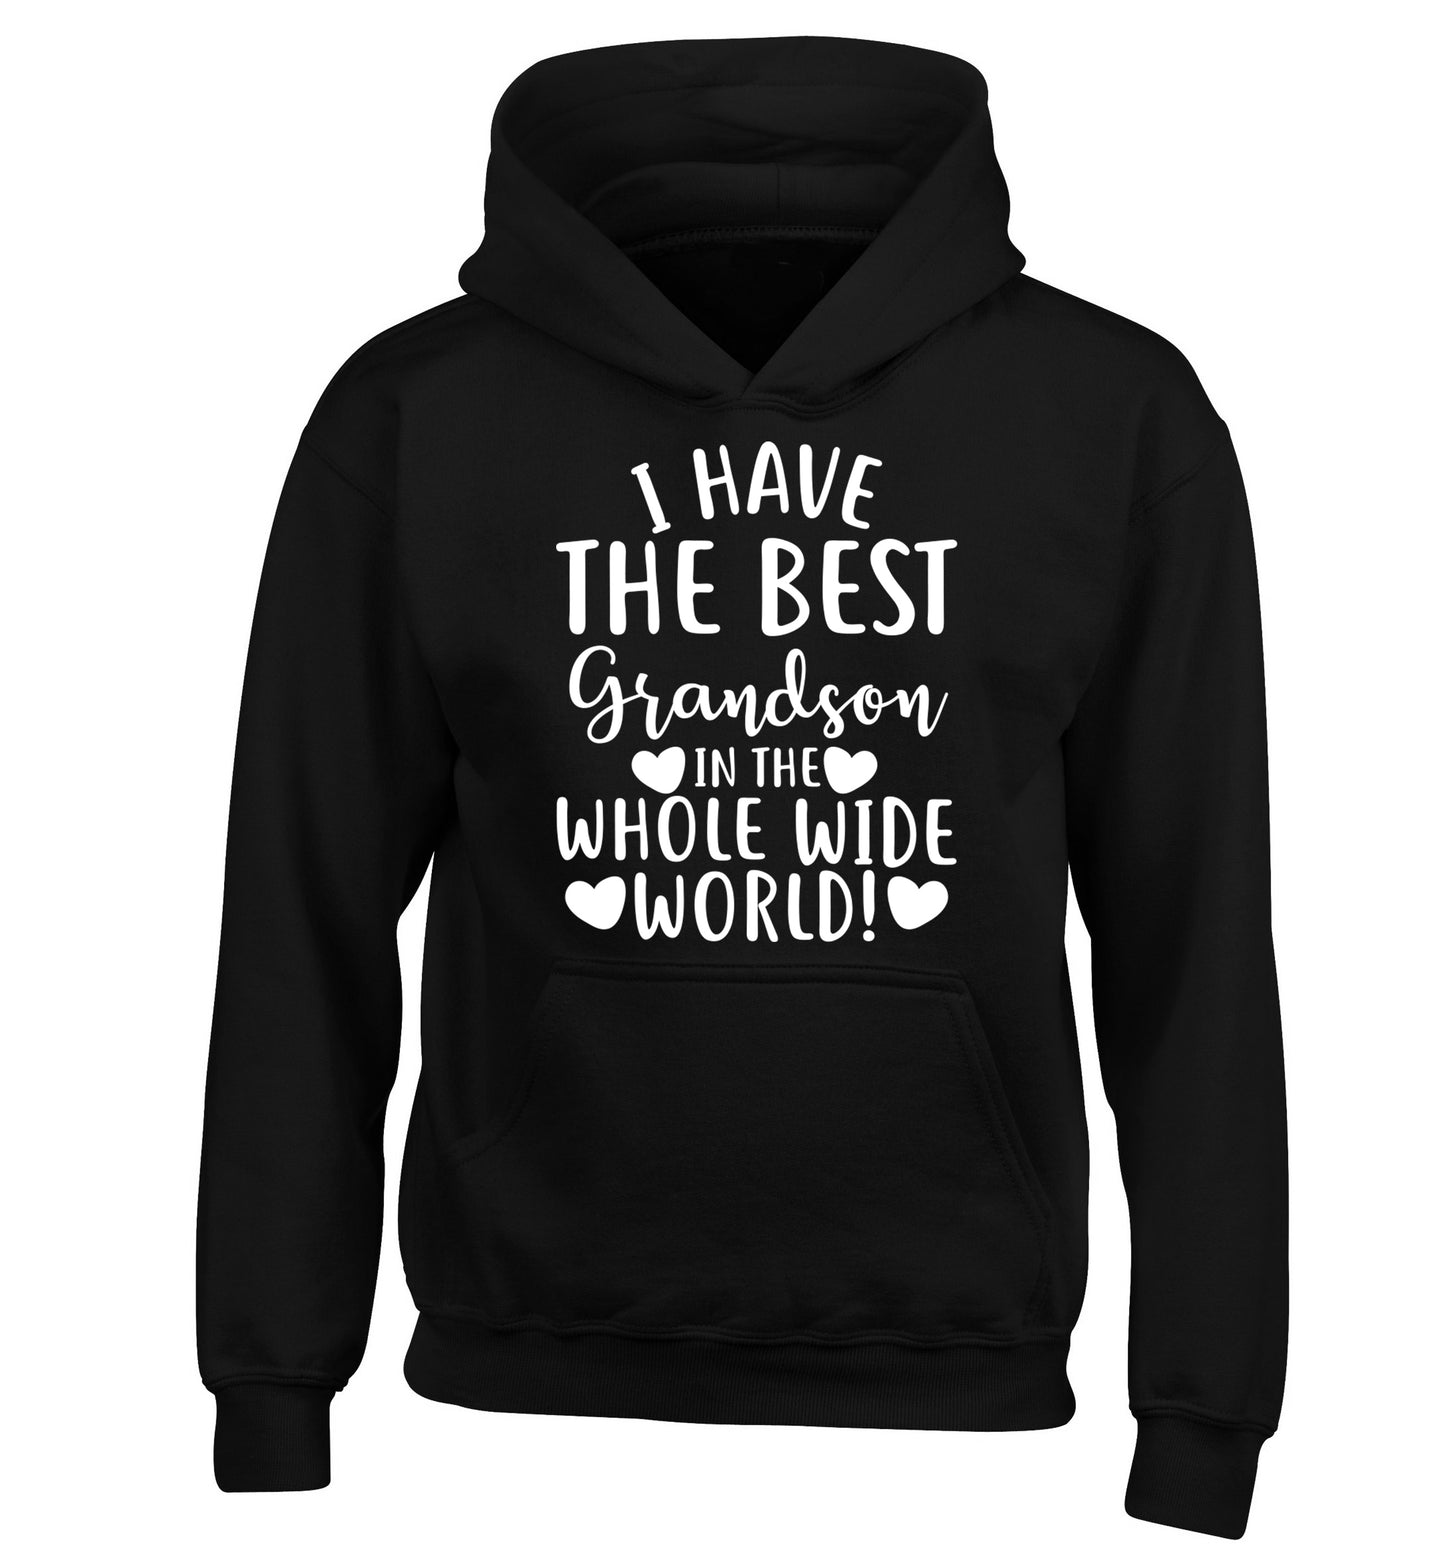 I have the best grandson in the whole wide world! children's black hoodie 12-13 Years